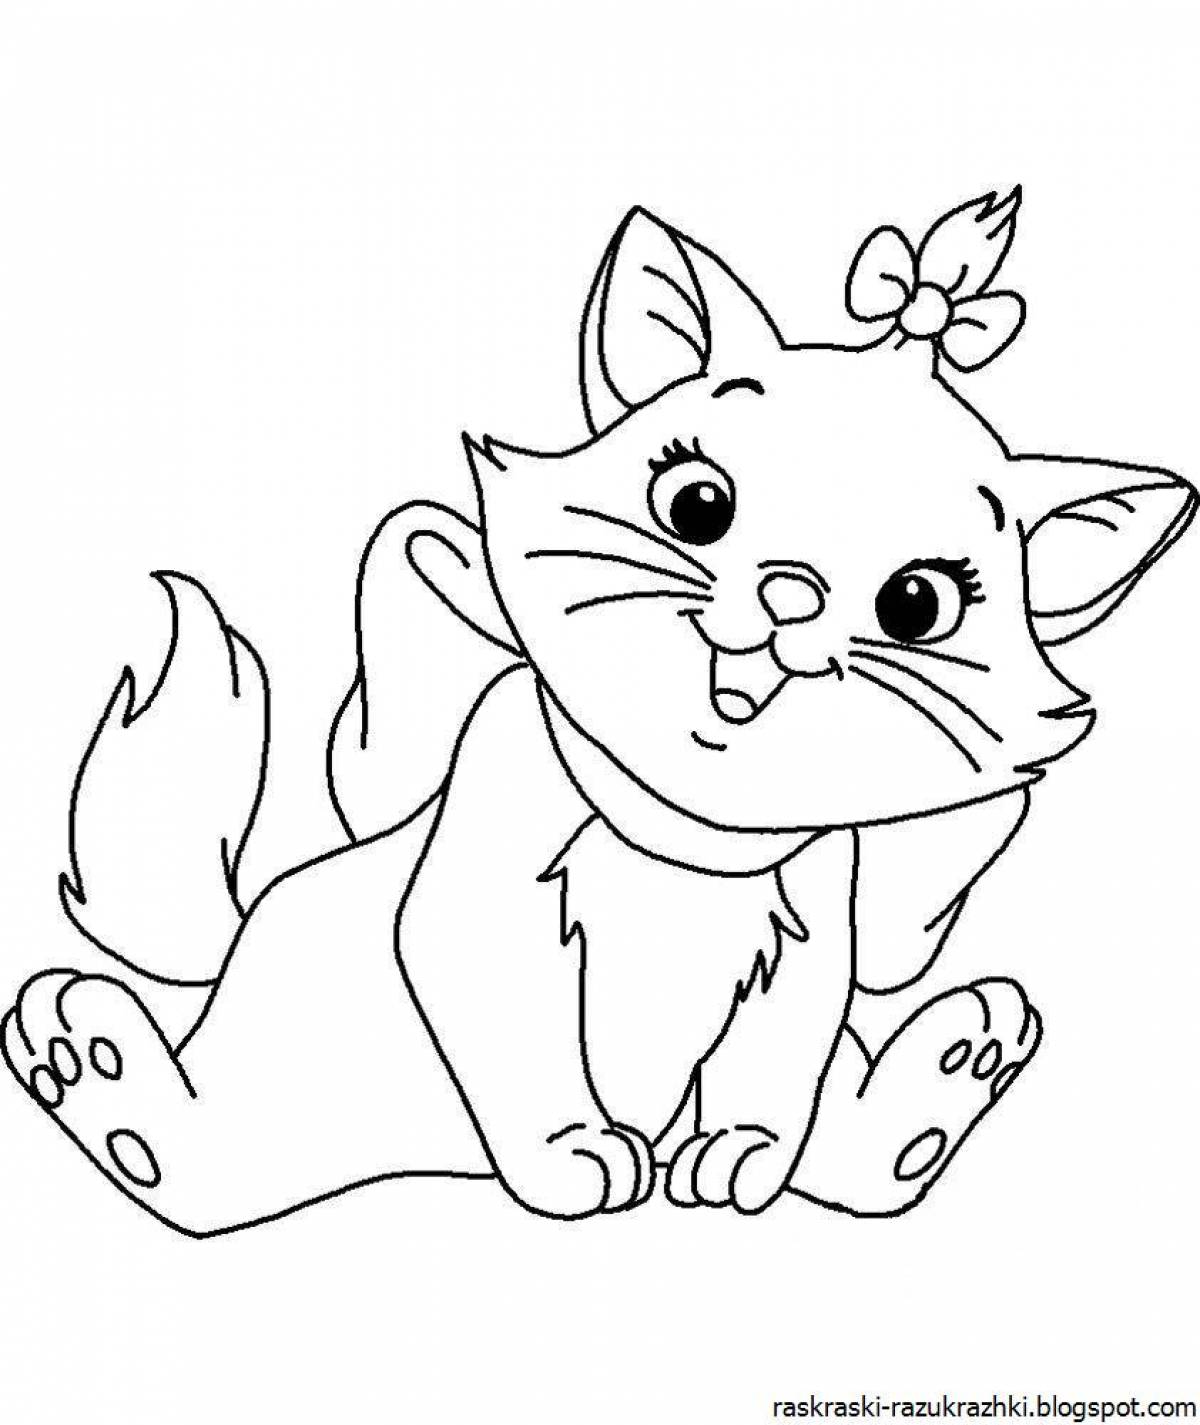 Cute kitty coloring book